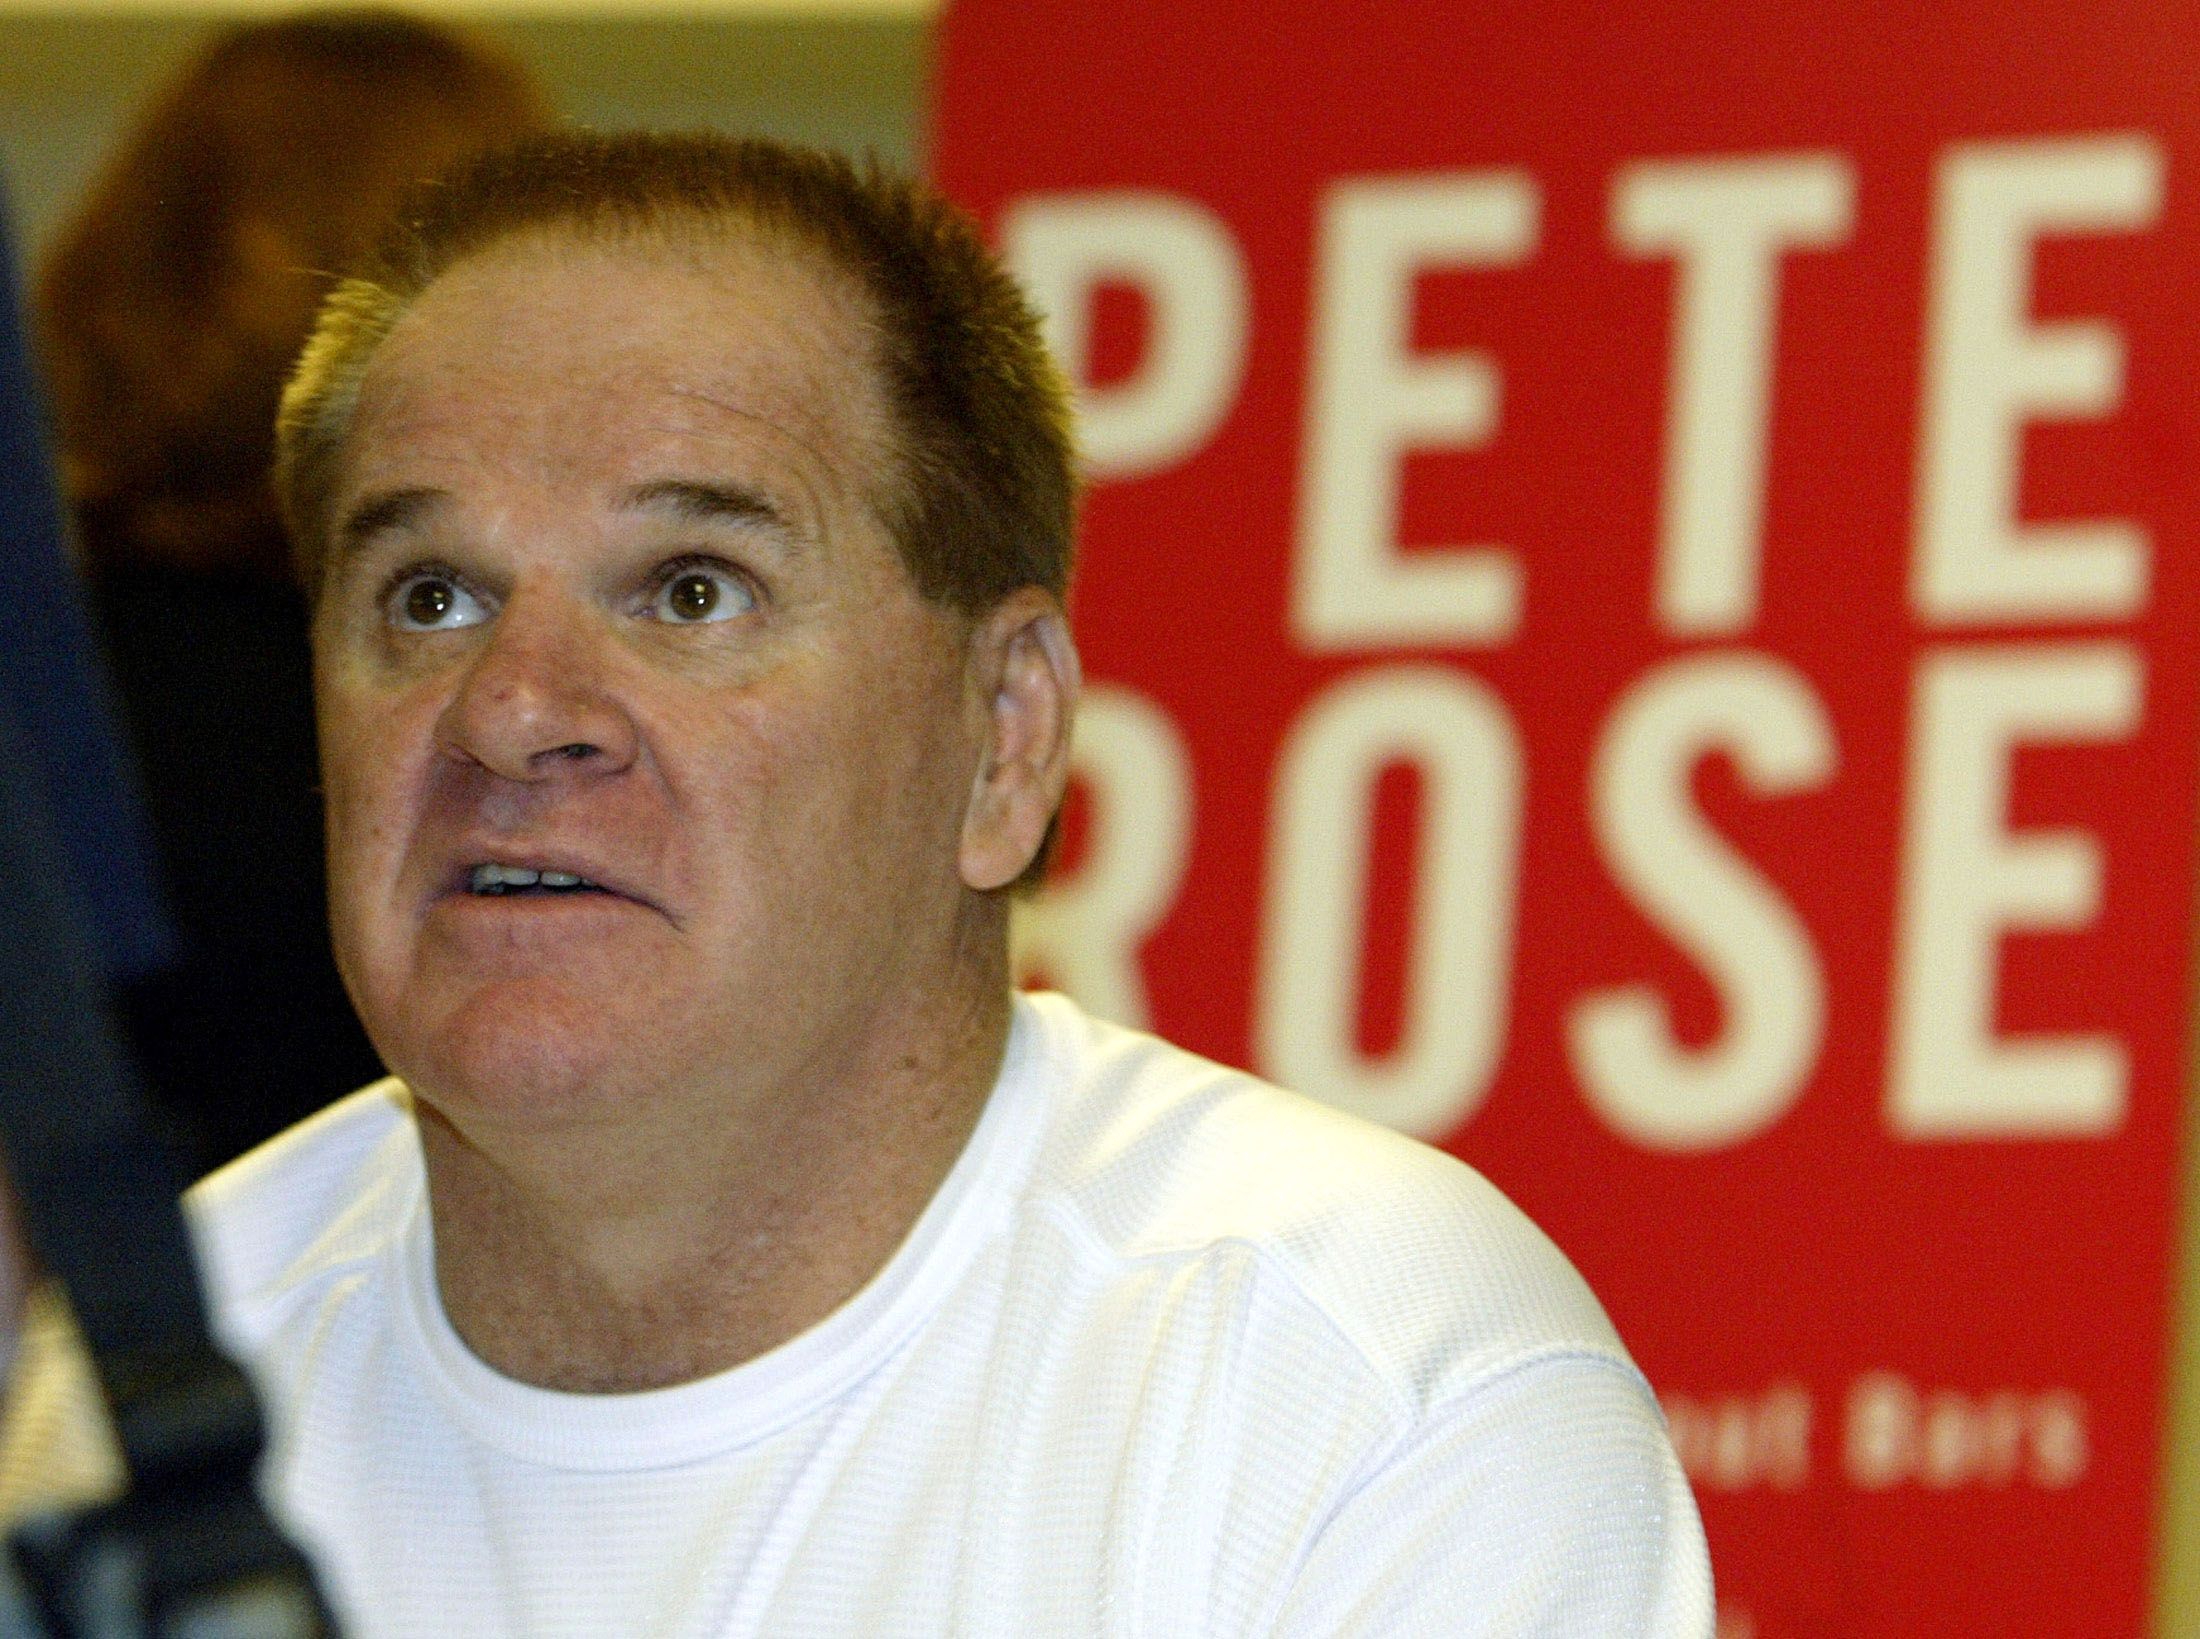 Pete Rose to Appear at MLB All-Star Game, Despite Lifetime Ban